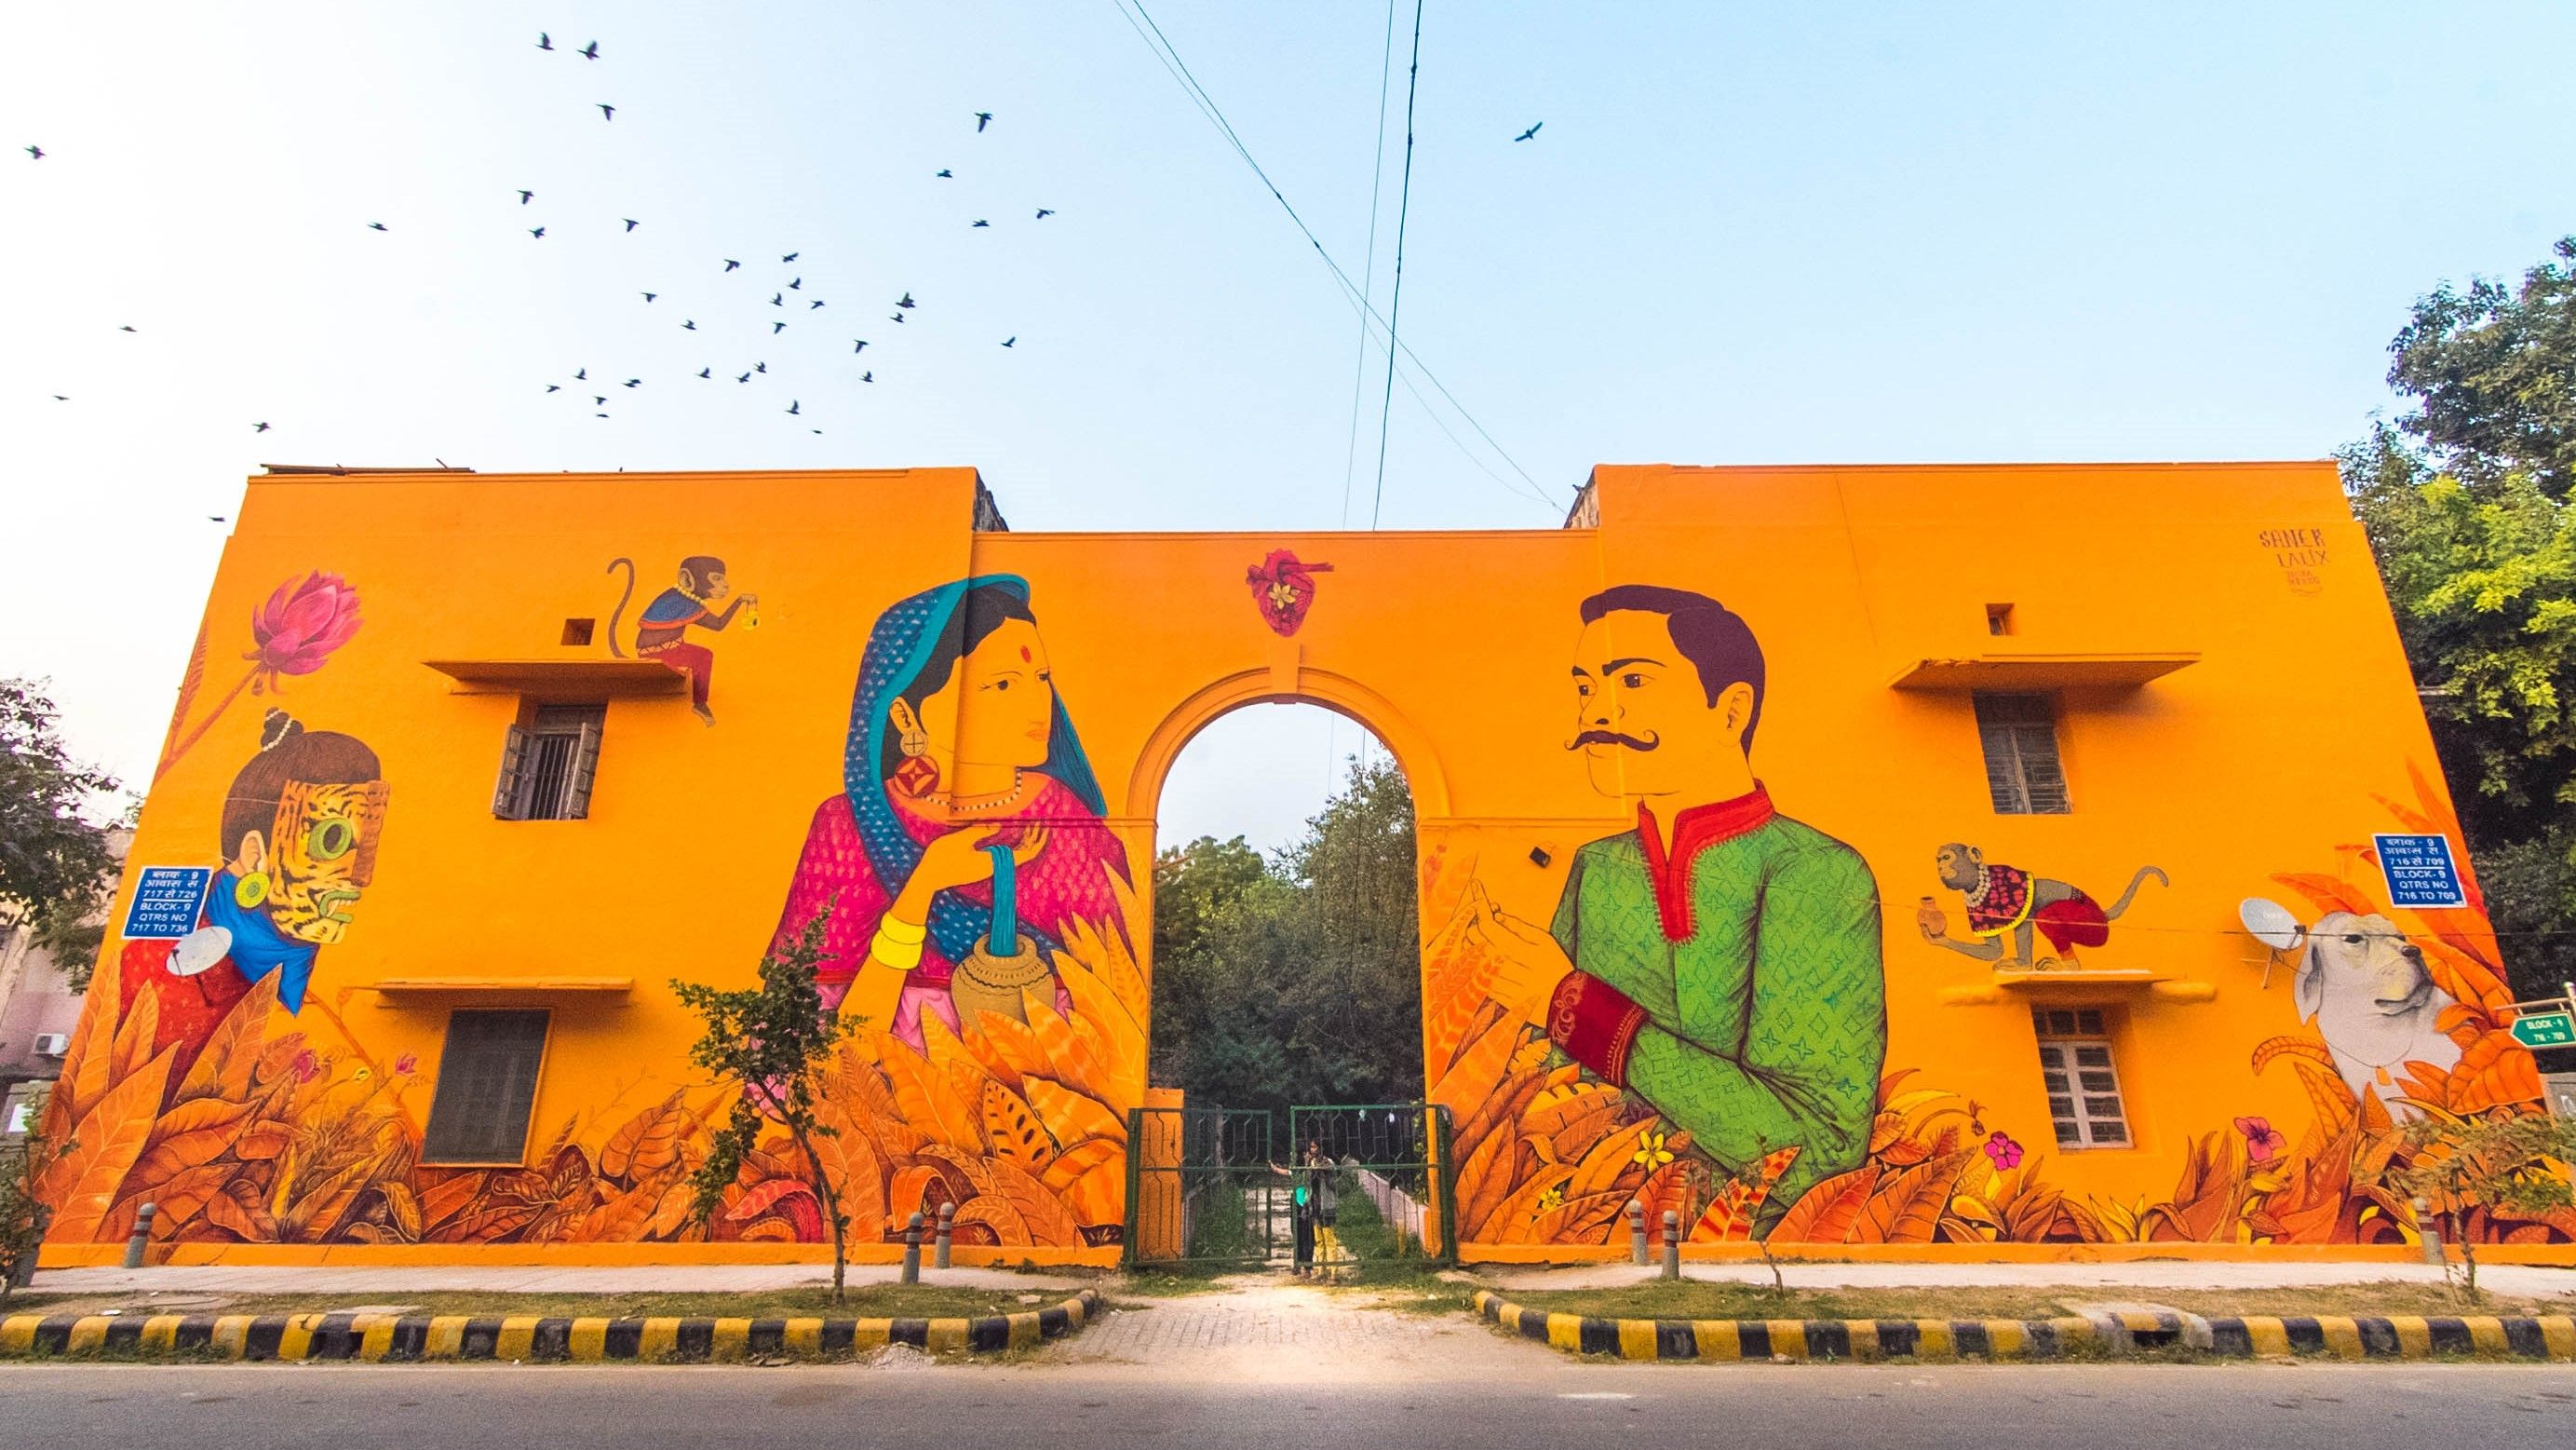 St+art Delhi 2019: All you need to check out at this year’s public art festival